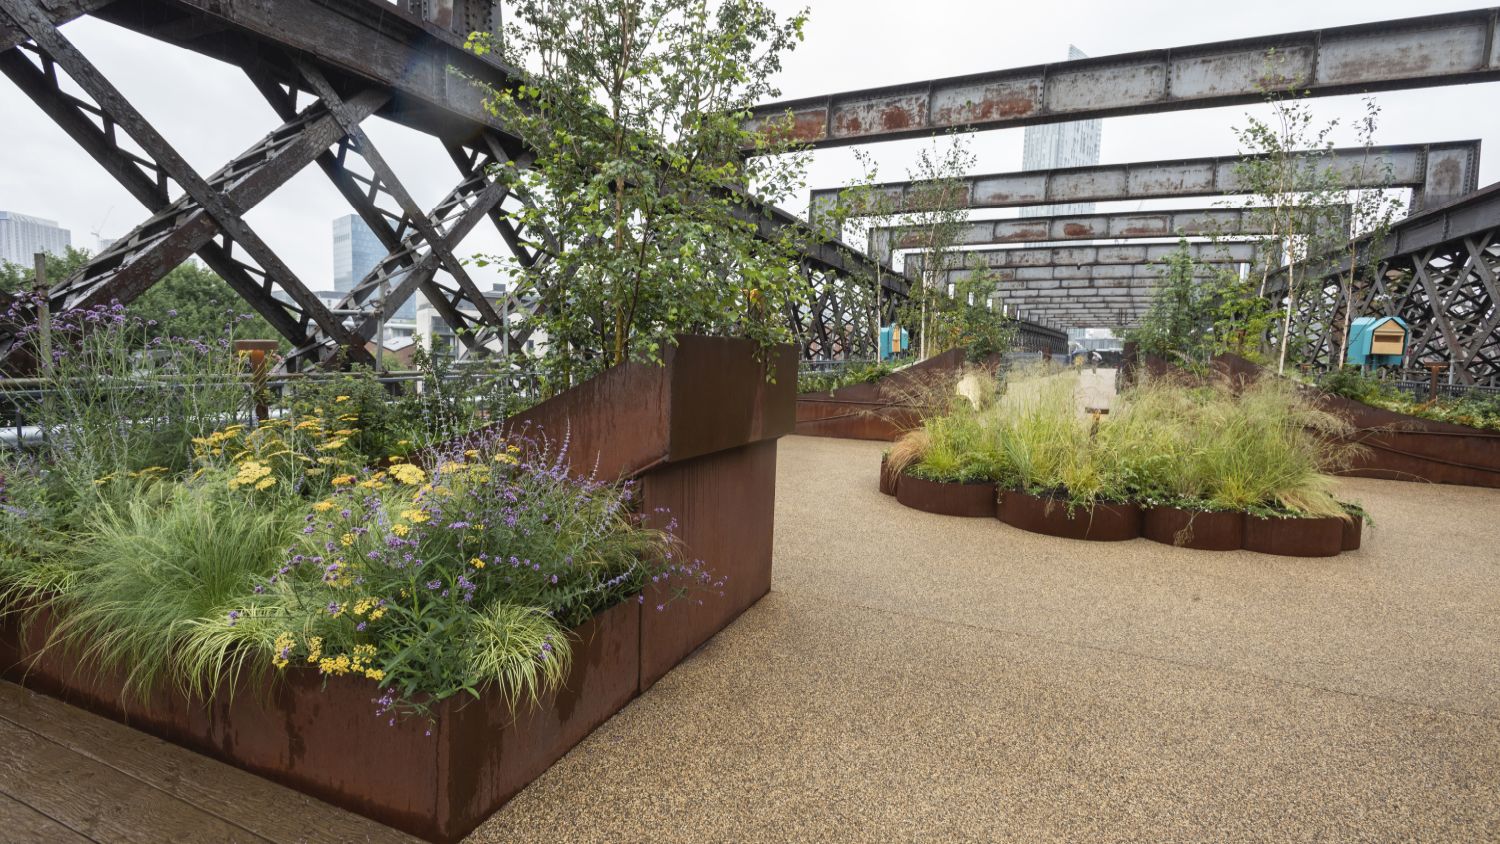 Industrial planters full of new plants sit on the transformed Castlefield Viaduct in Manchester, as part of a new urban 'sky park'.